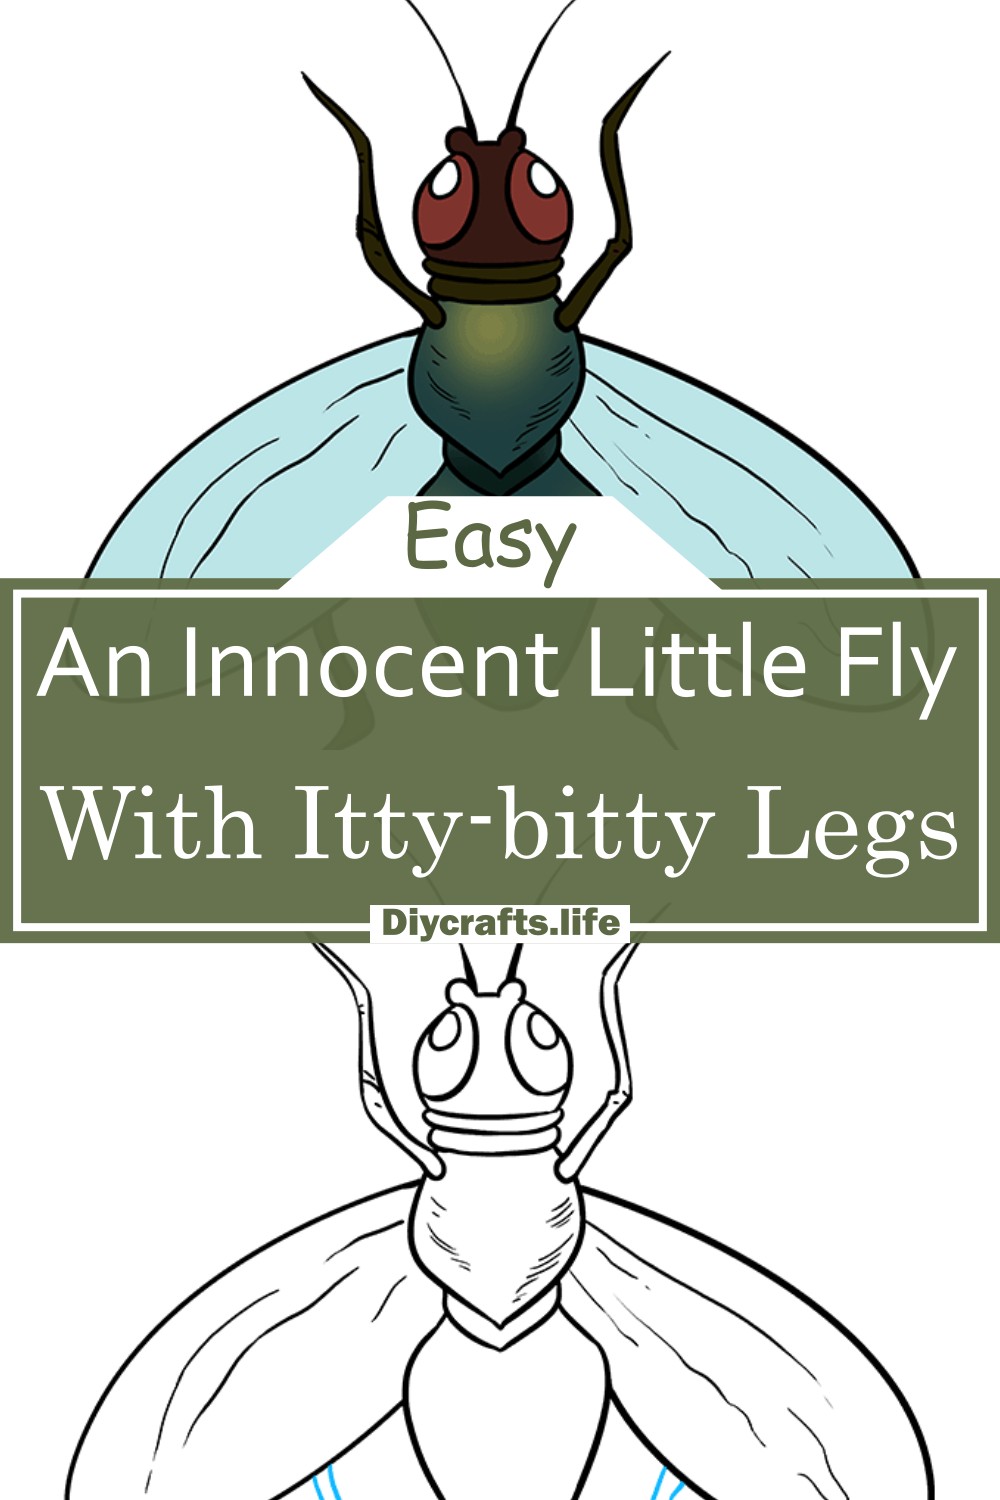 An Innocent Little Fly With Itty-bitty Legs